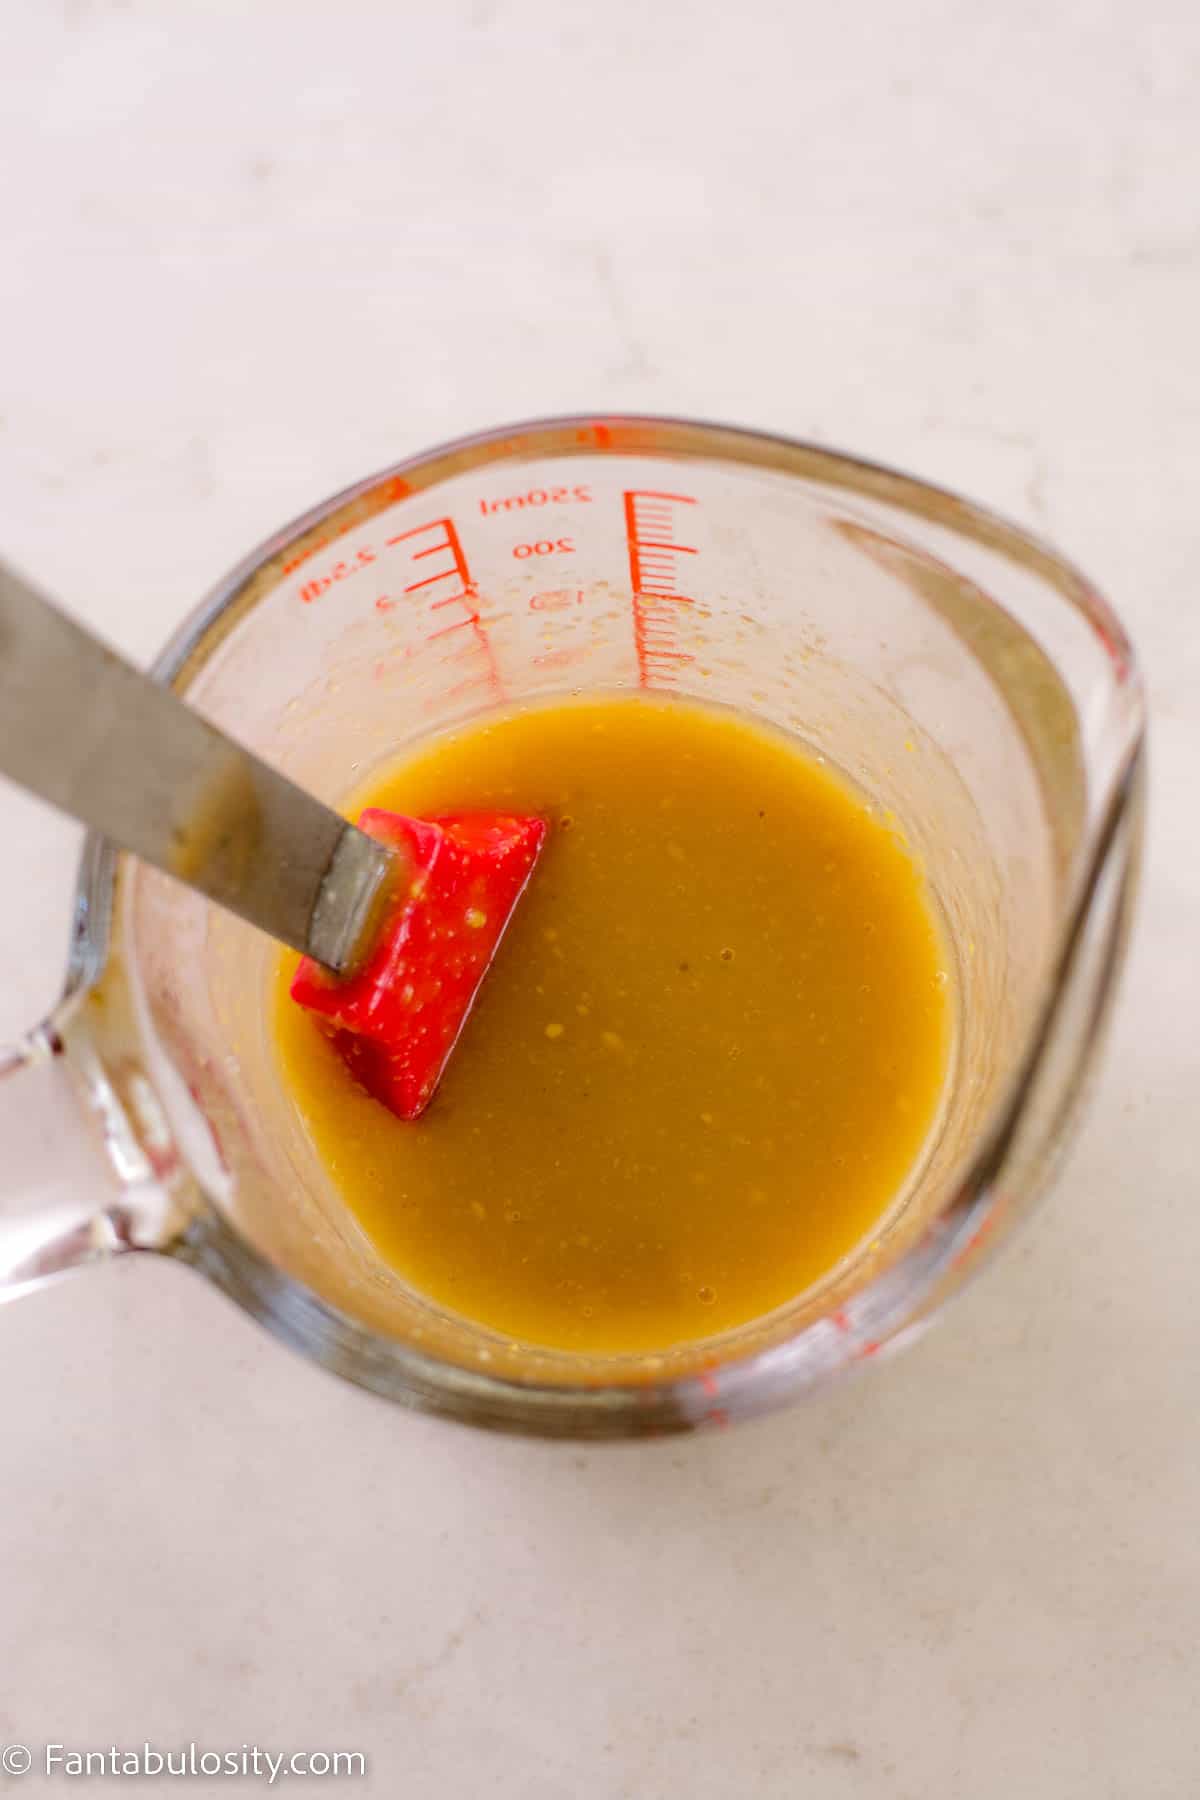 Melted butter and seasonings in glass measuring bowl